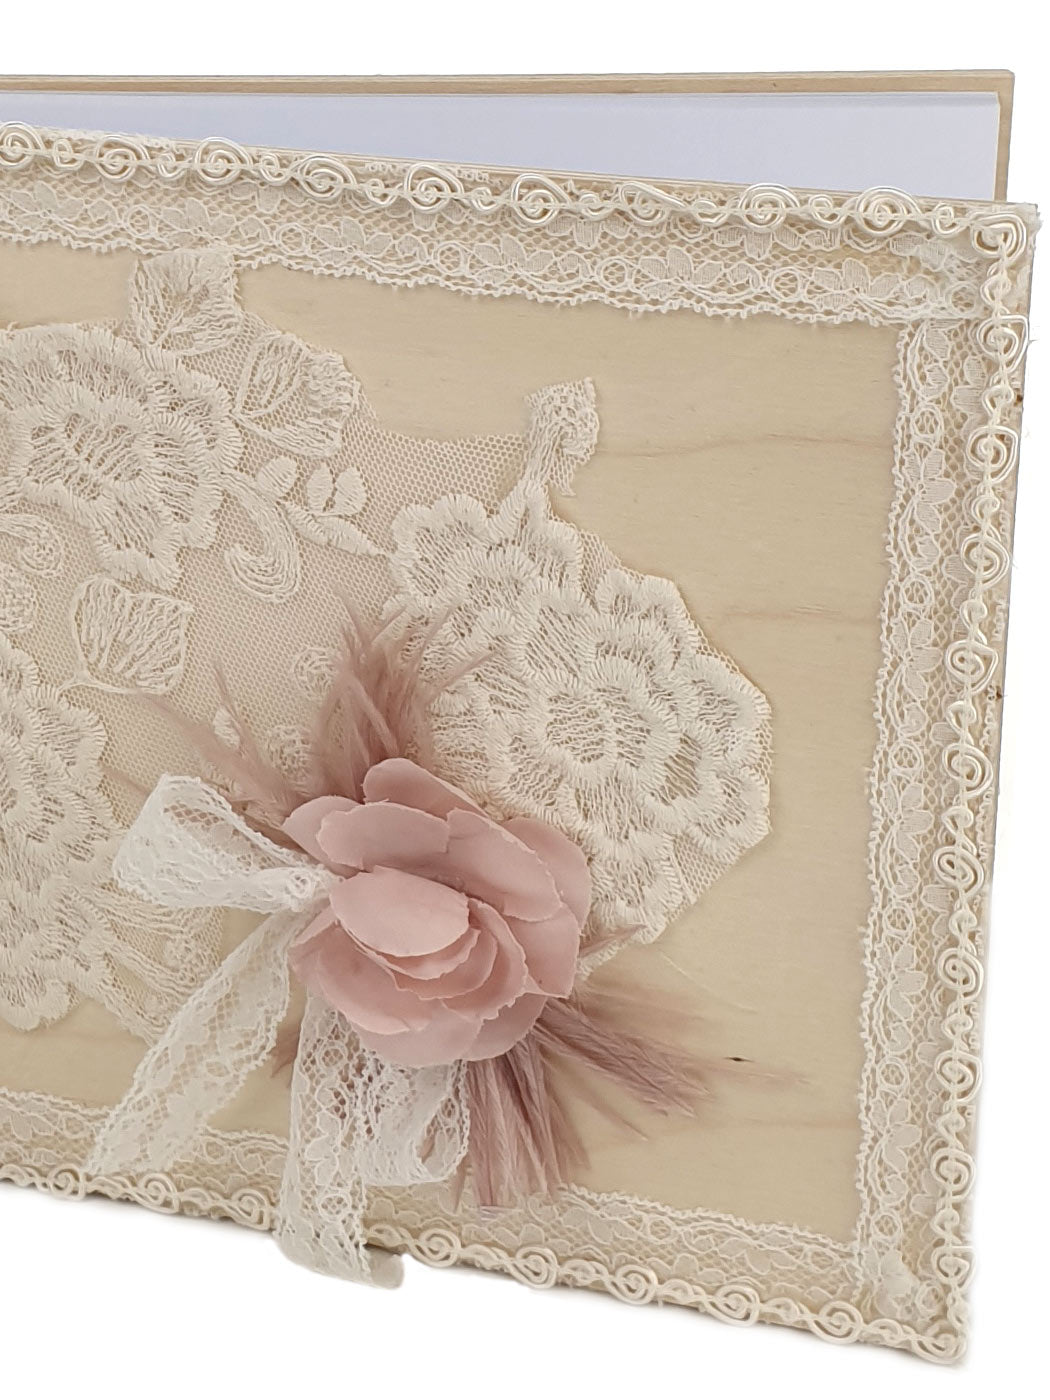 Christening wish Book with Lace